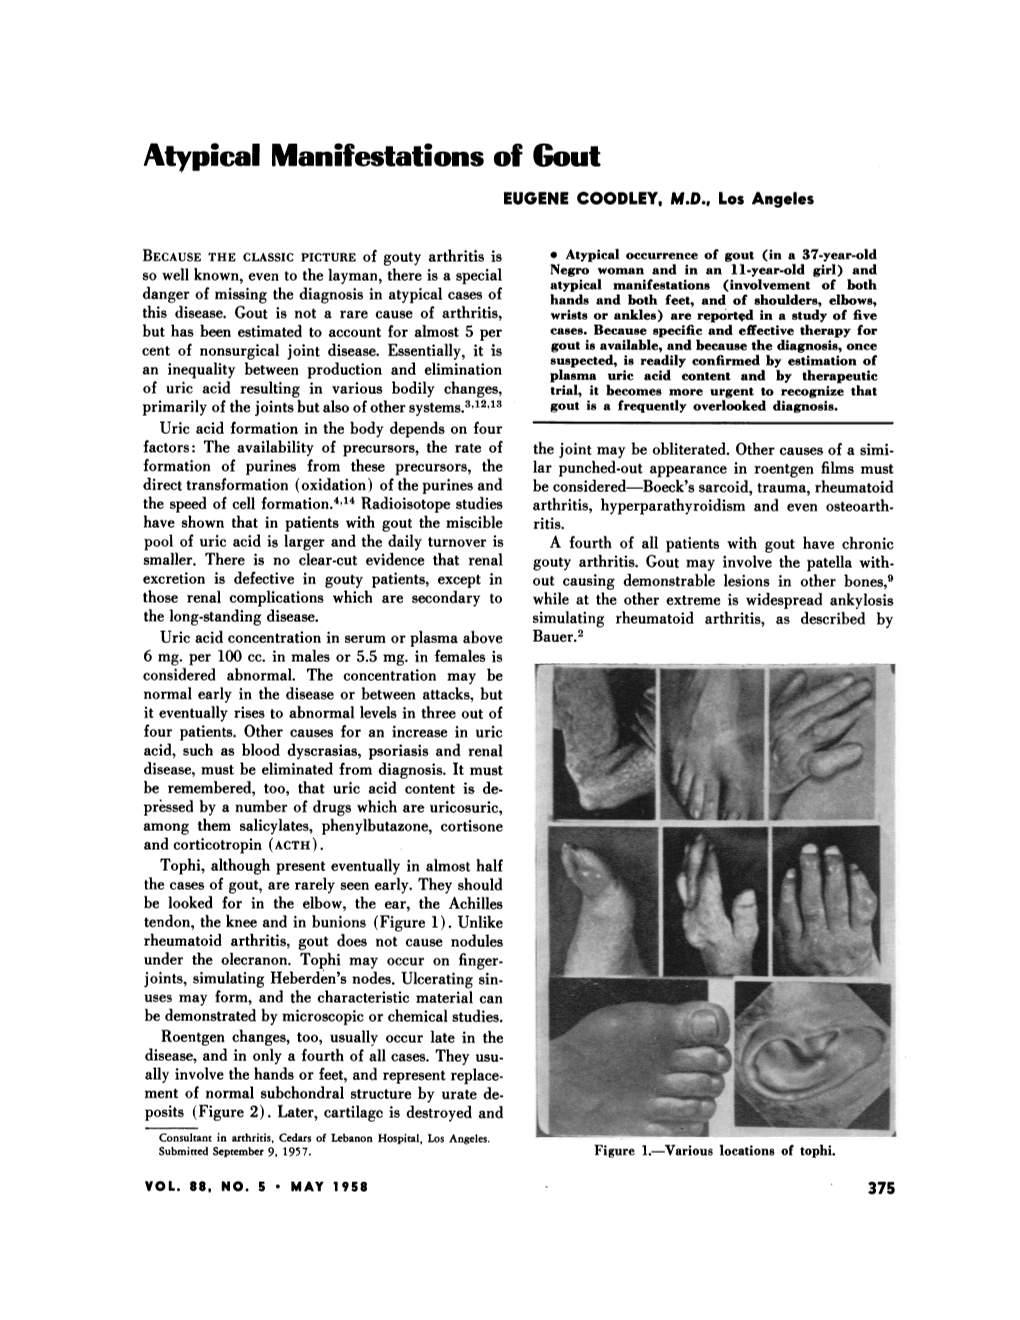 Atypical Manifestations of Gout EUGENE COODLEY, M.D., Los Angeles